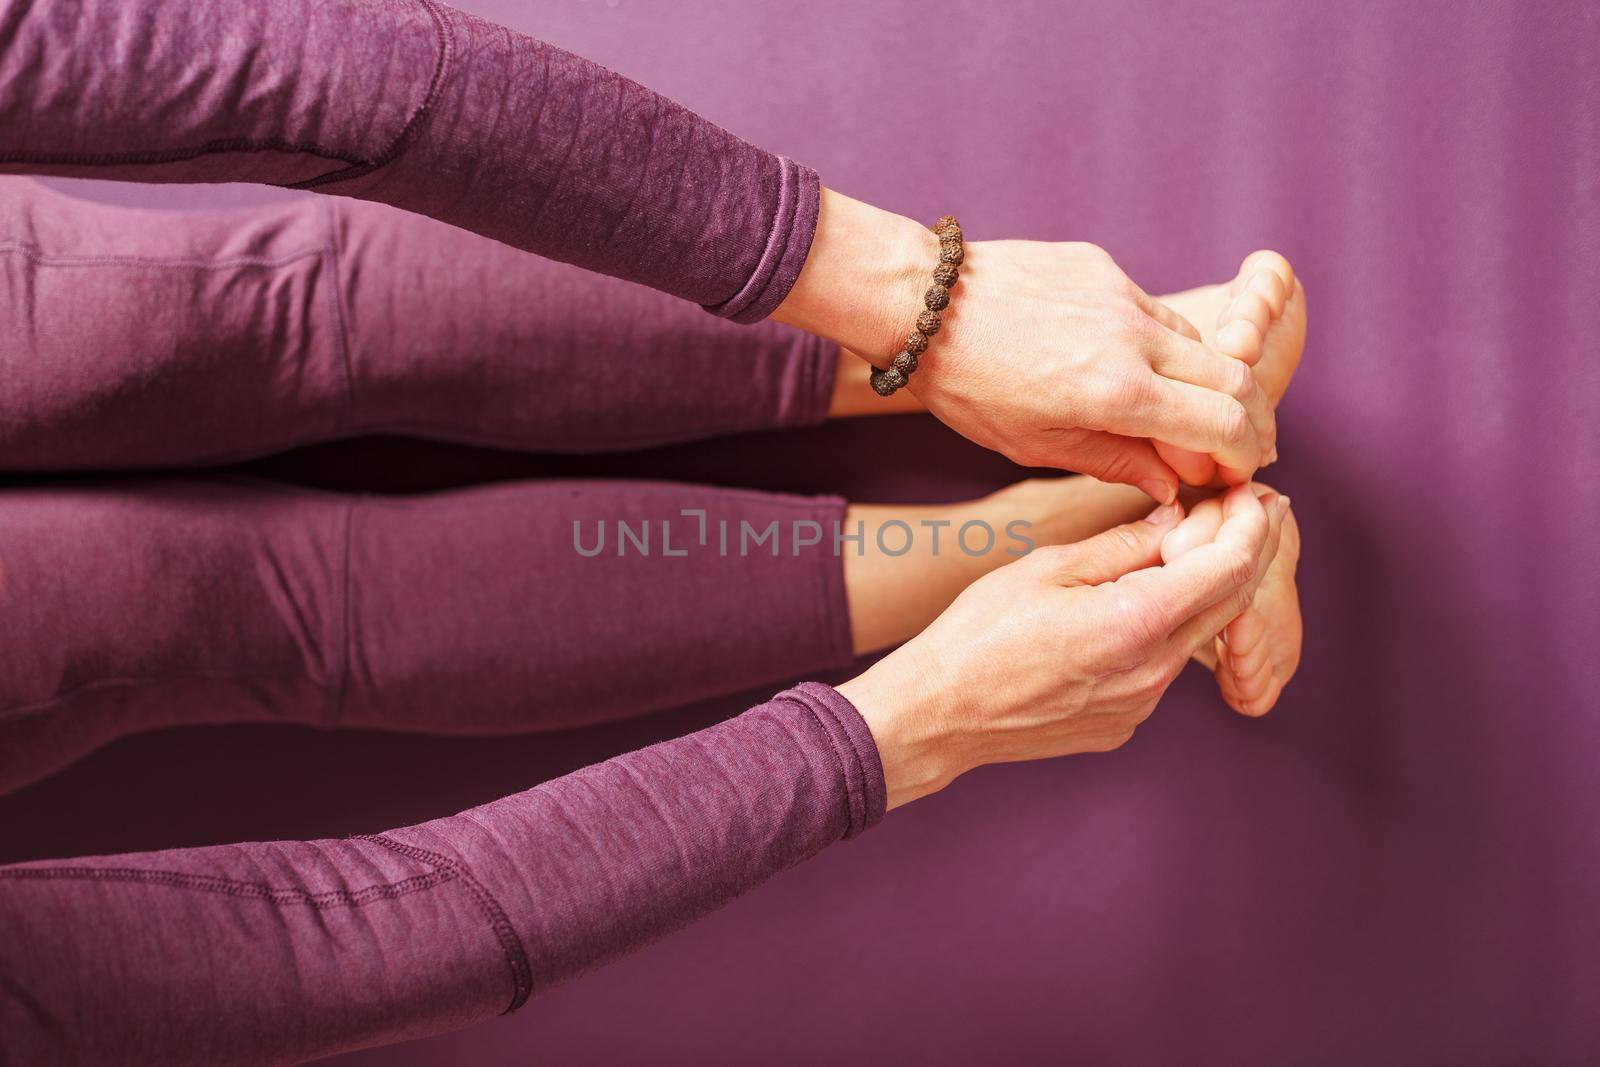 Legs and hands of a woman on a yoga mat practicing asanas by AlexGrec